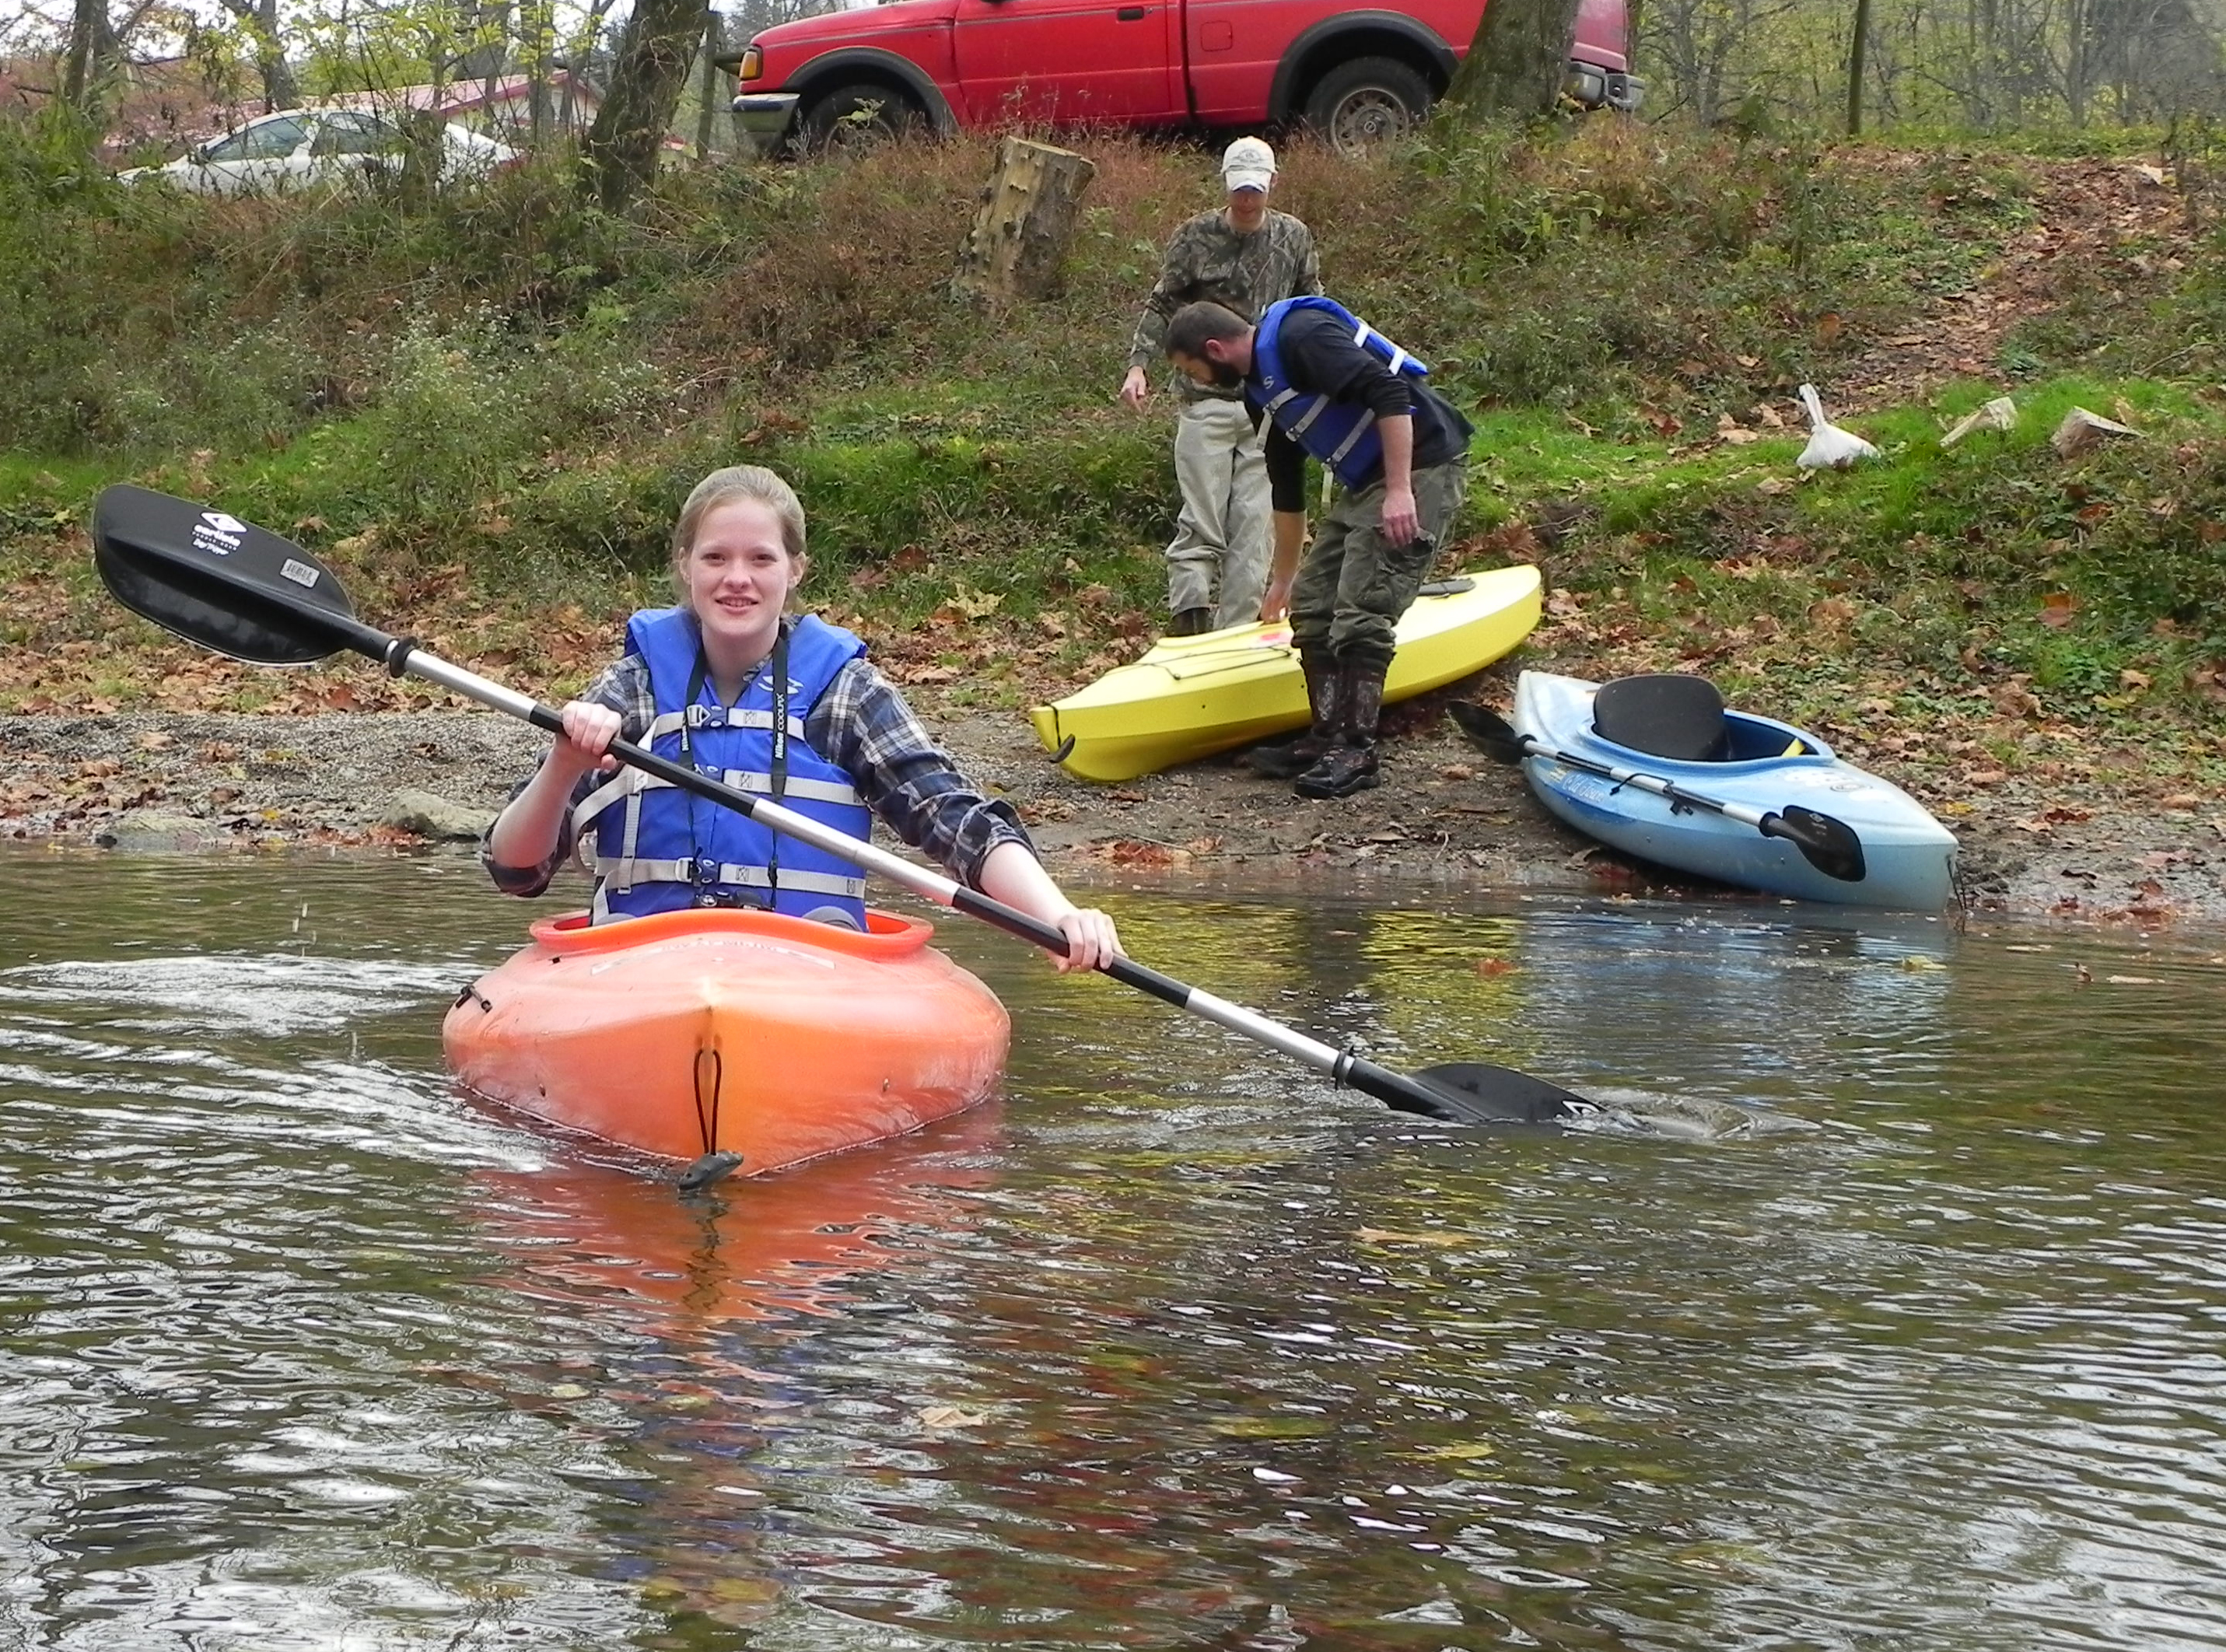 Student in kayak with other students on riverbank